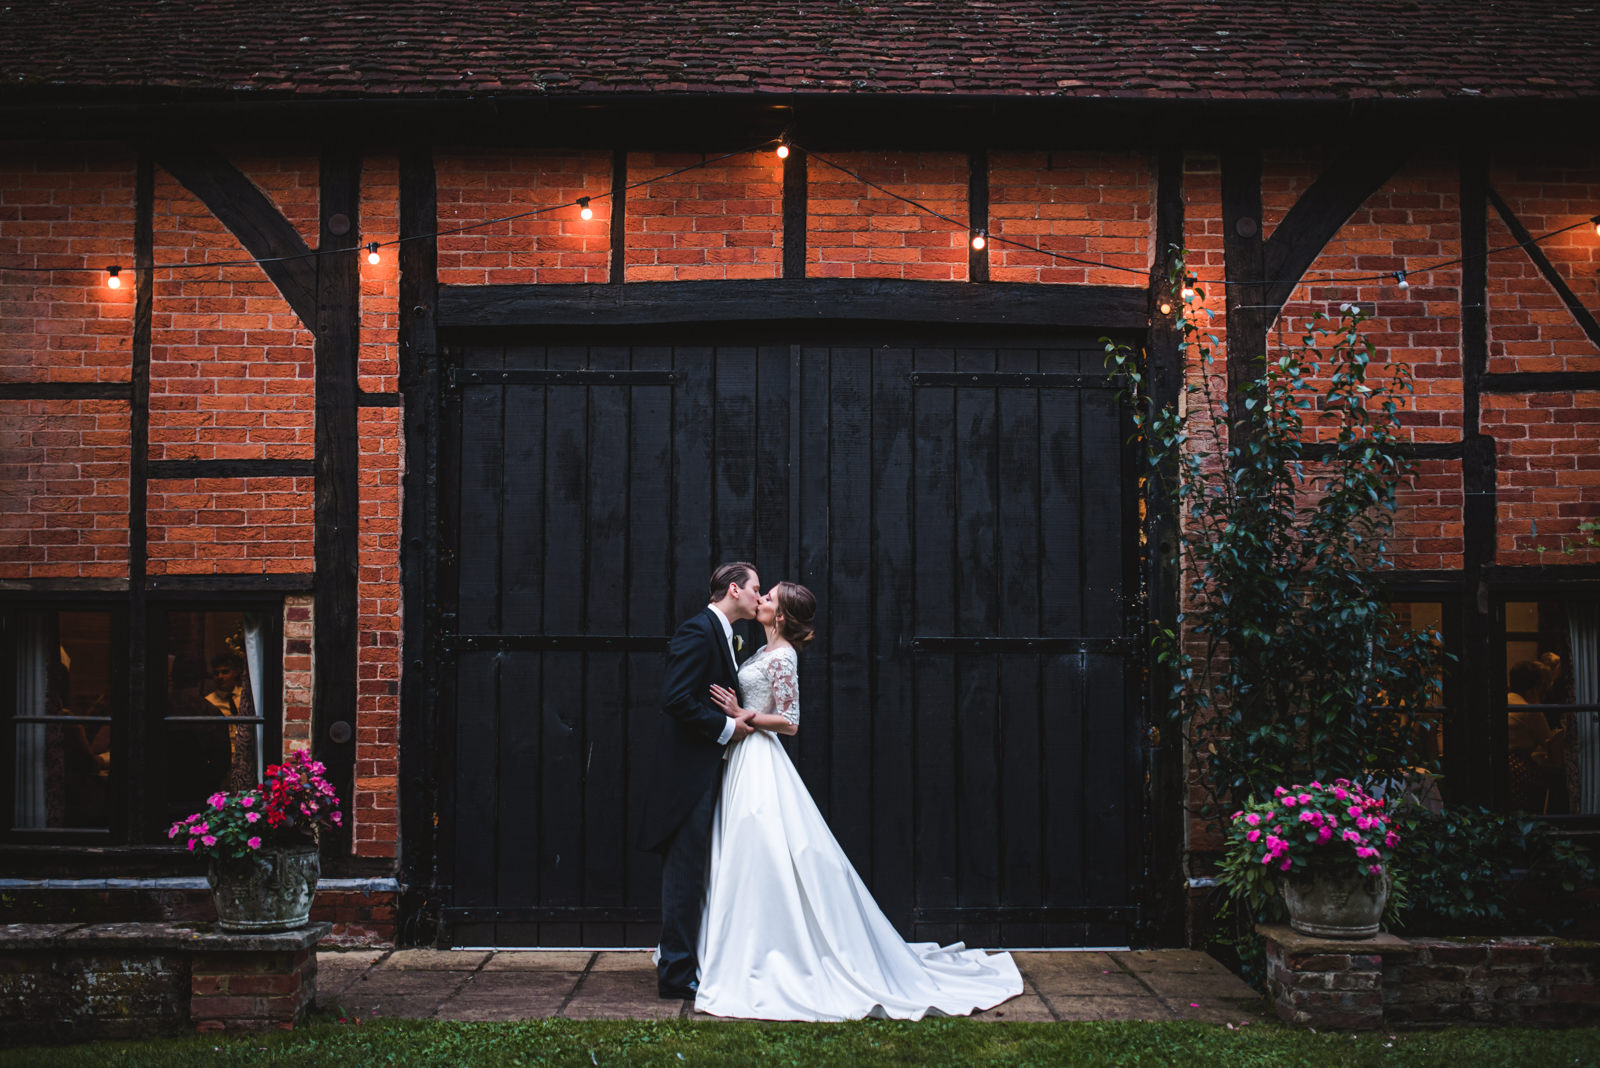 Romantic wedding day photography in Hampshire